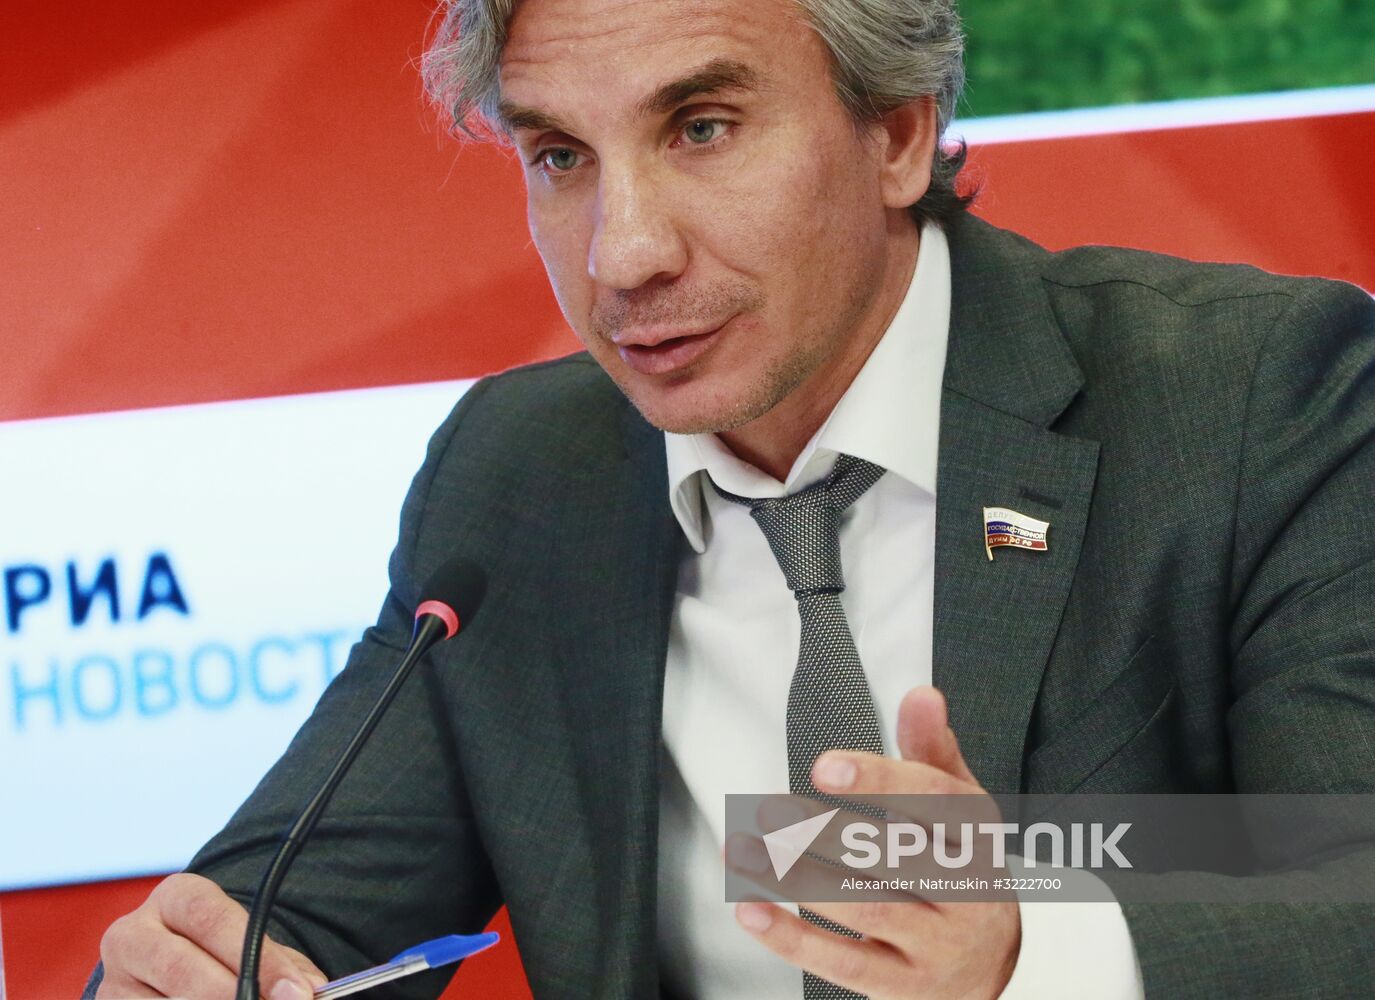 News conference, Preparations for the 2018 FIFA World Cup and the Future of Russian Sport